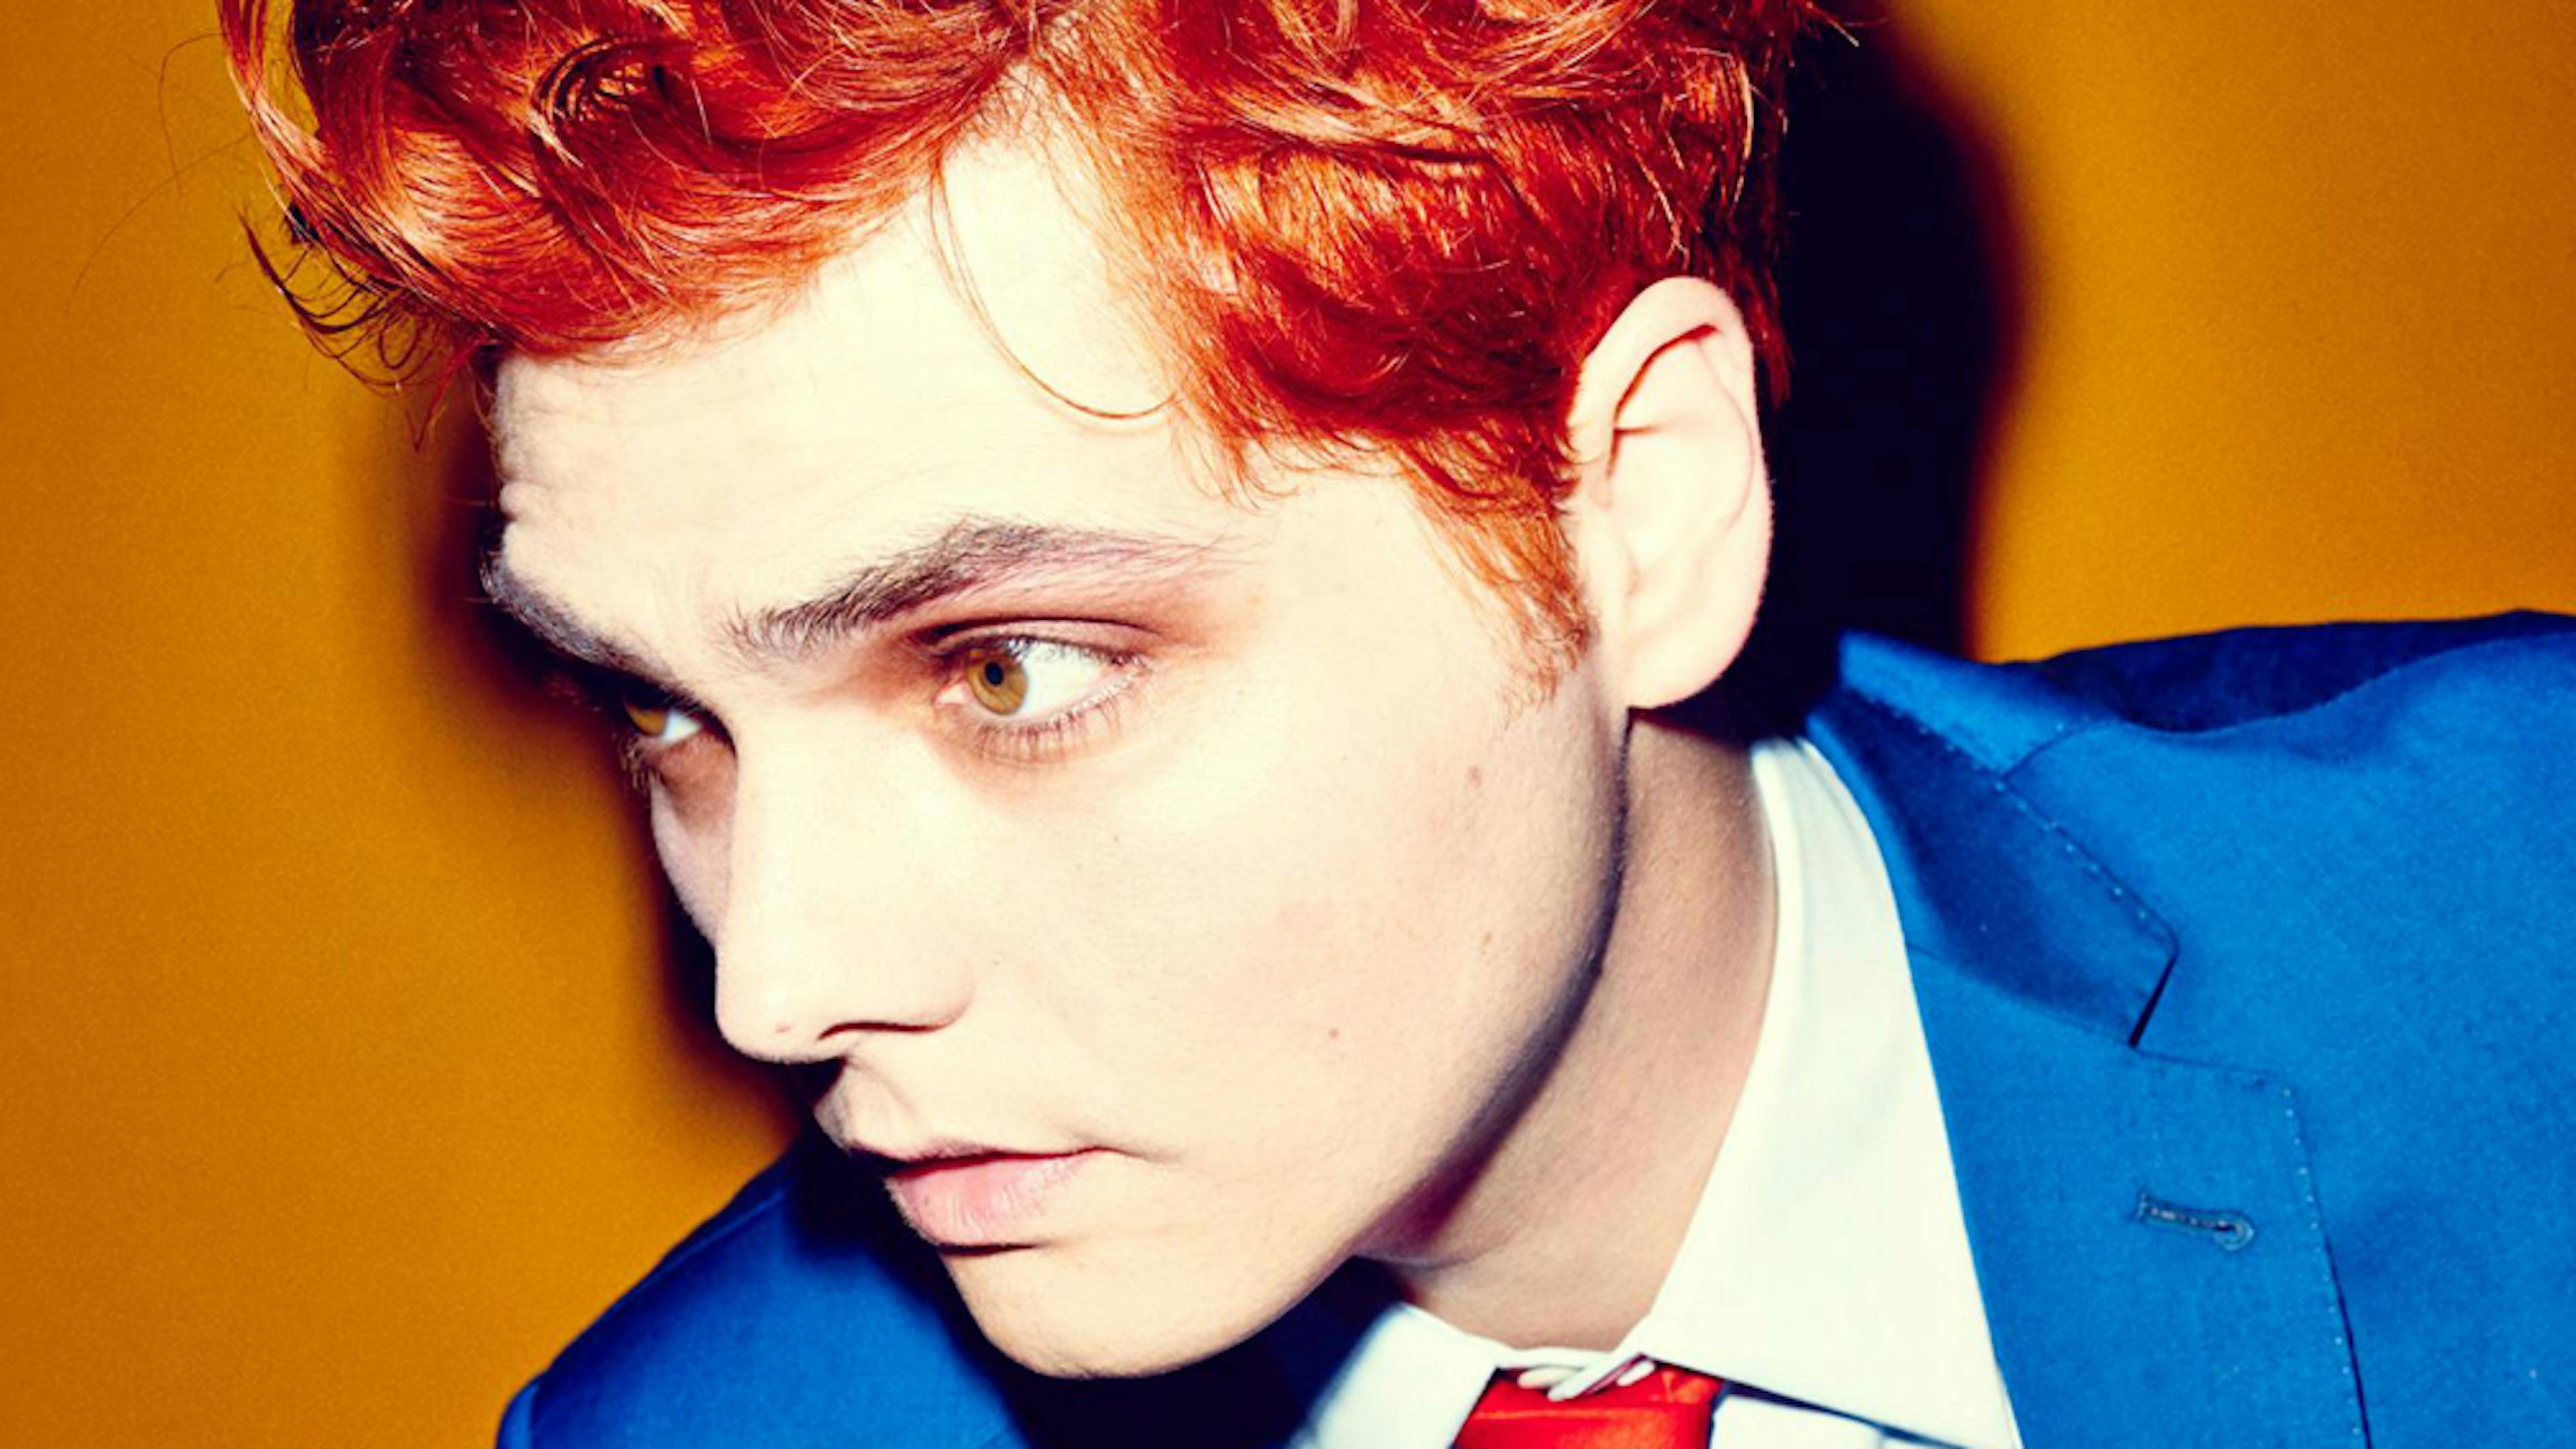 Gerard Way Drops New Solo Single, Getting Down The Germs